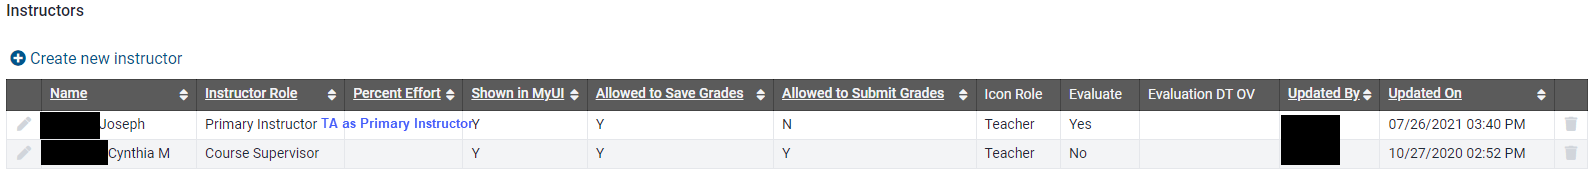 Instructor panel shows TA assigned as the Primary Instructor and the mandatory Course Supervisor listed due to the TA listed as Primary